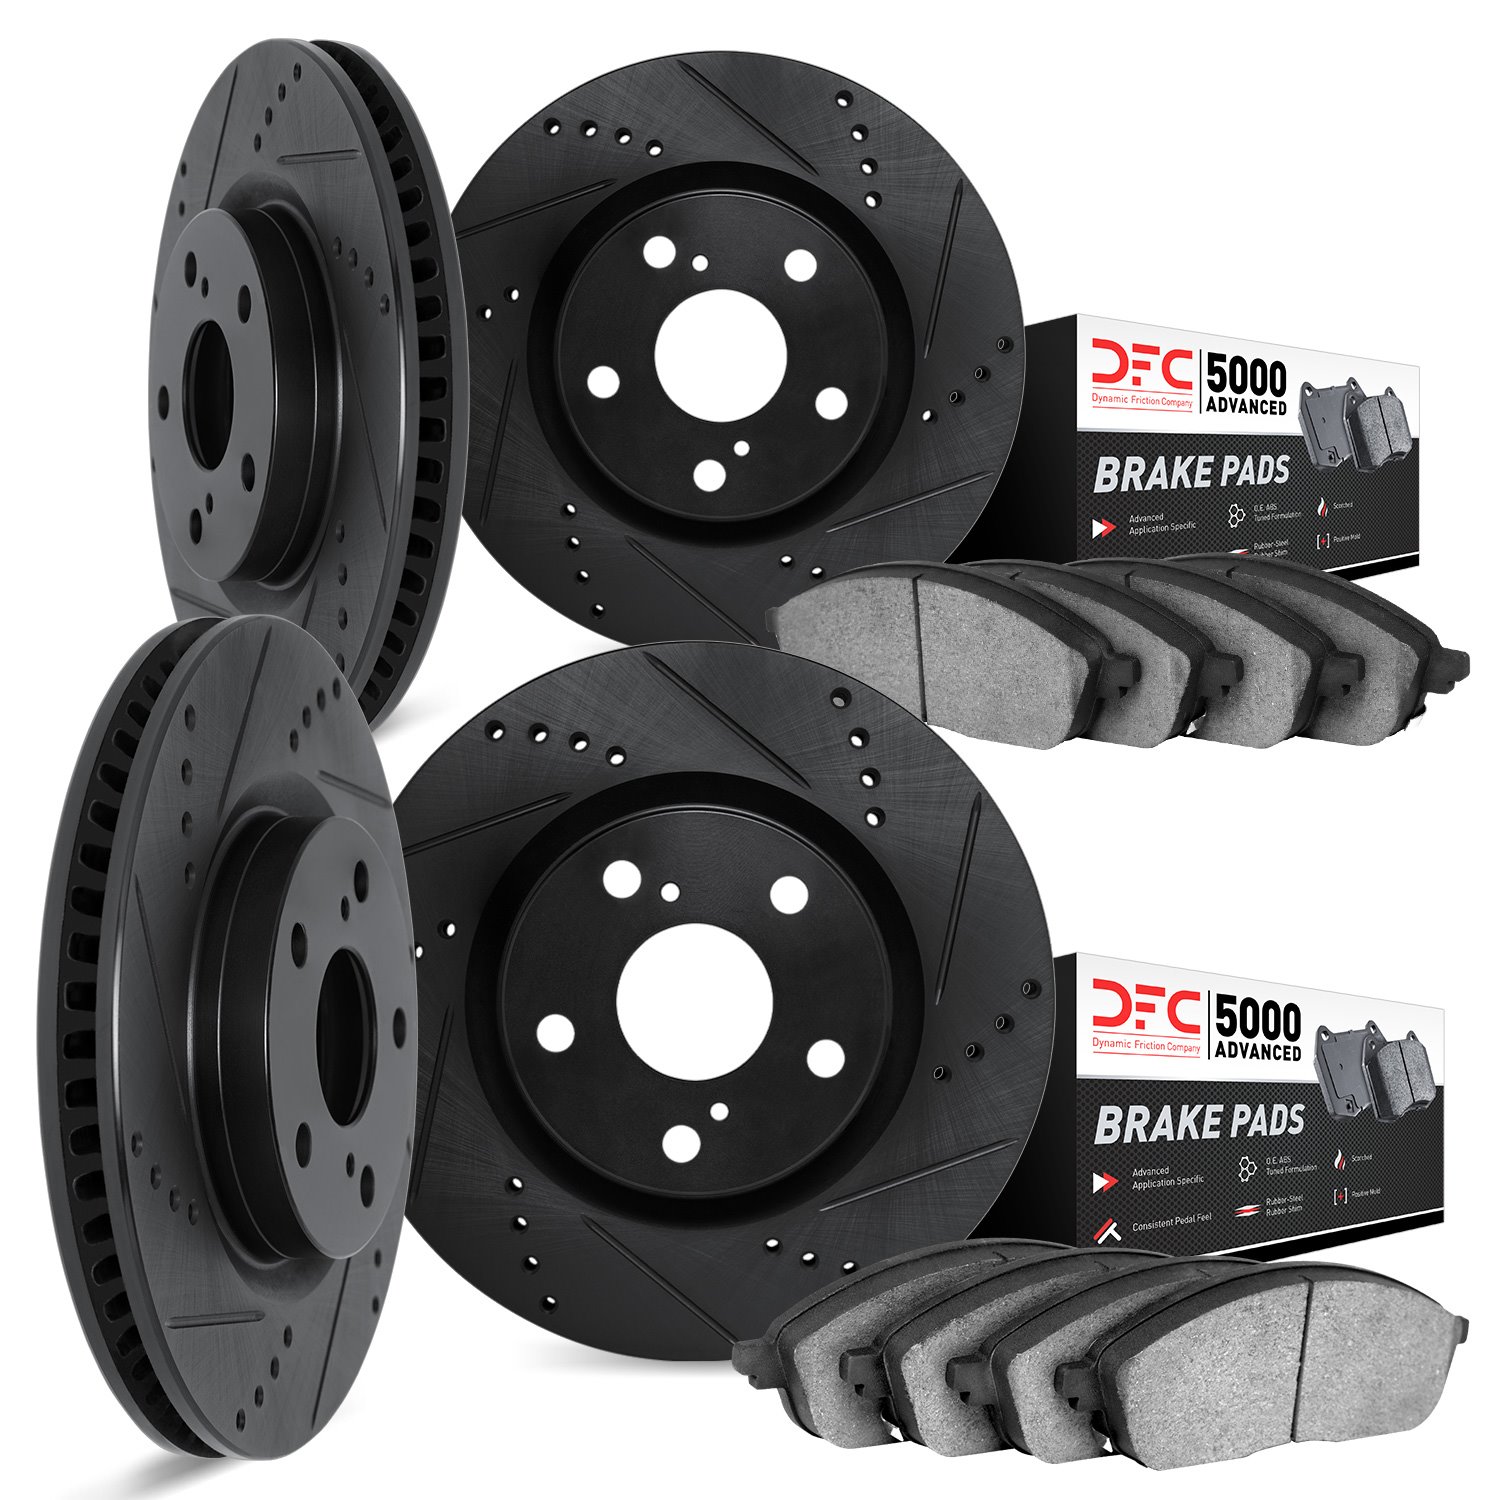 8504-46025 Drilled/Slotted Brake Rotors w/5000 Advanced Brake Pads Kit [Black], 2014-2019 GM, Position: Front and Rear